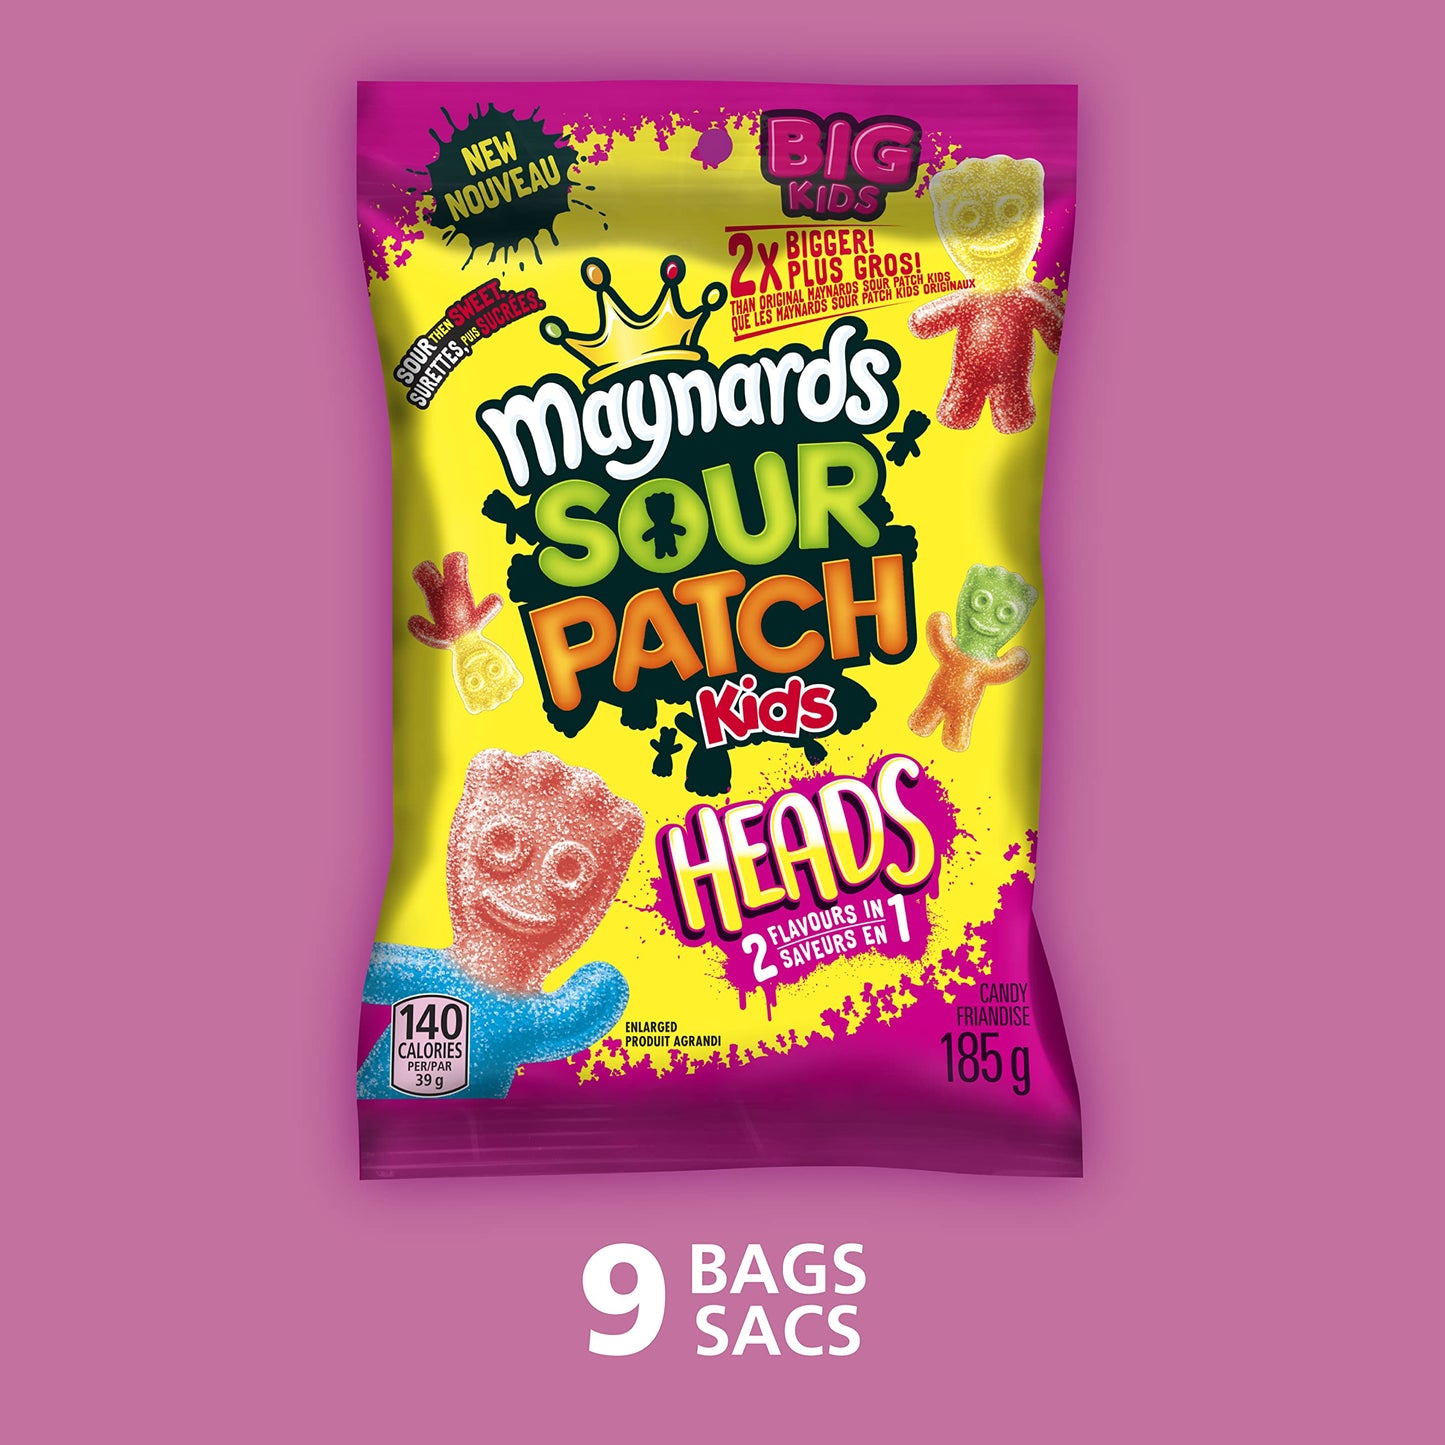 Maynards Sour Patch Kids Big Heads 185g/6.5oz (Shipped from Canada)